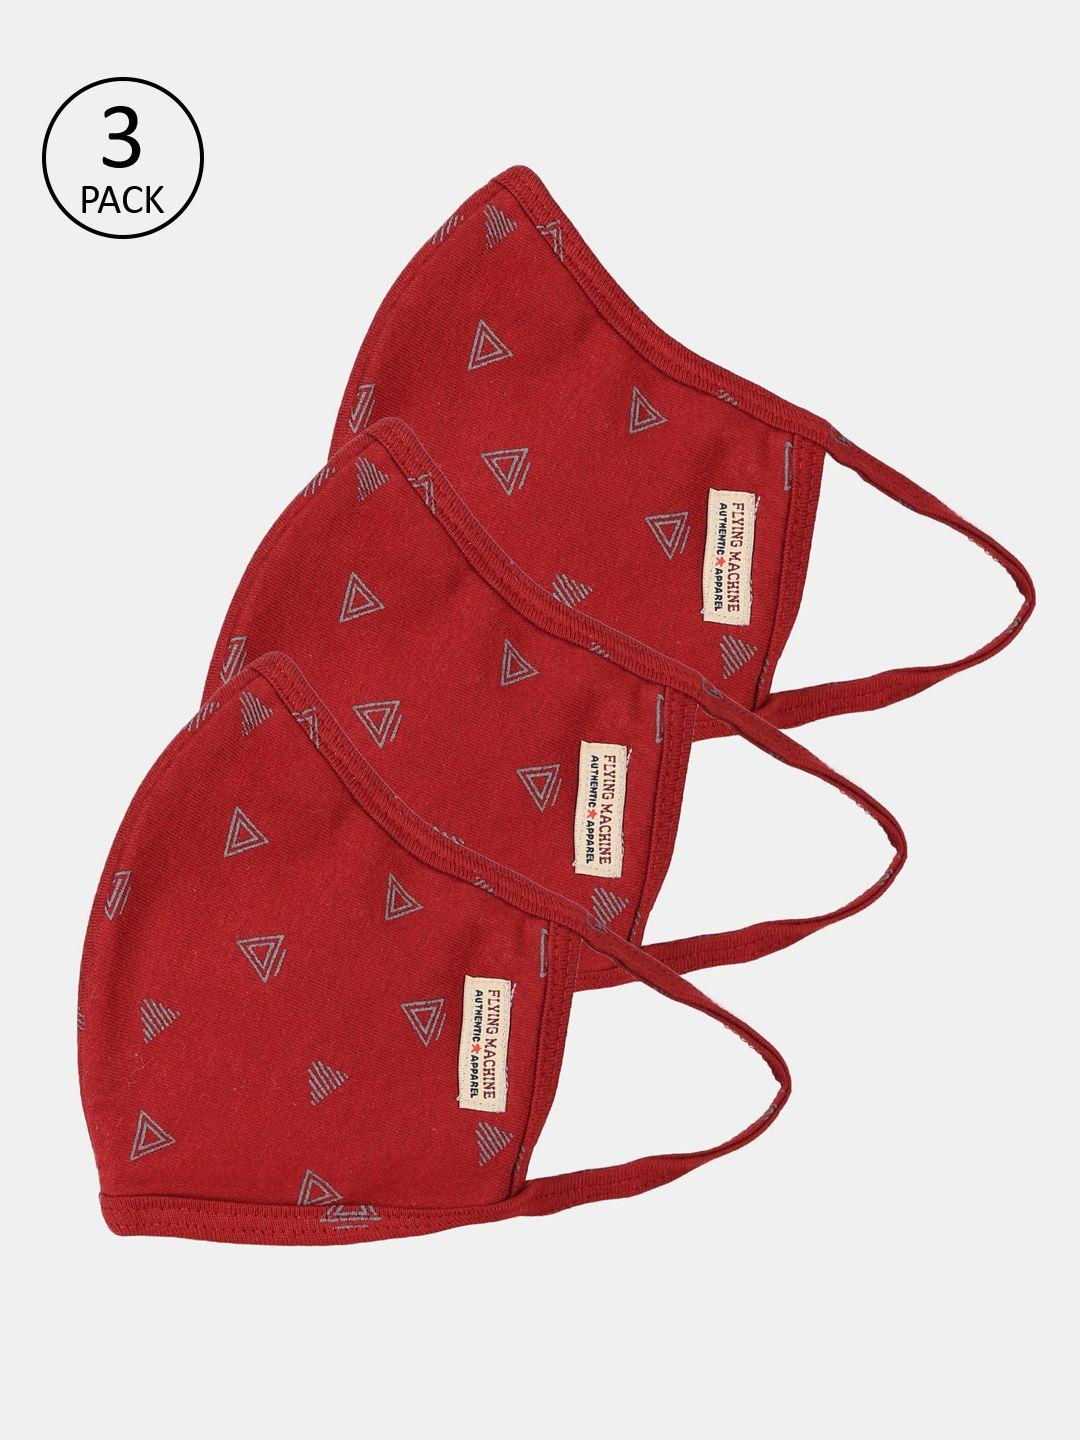 flying-machine-unisex-pack-of-3-red-&-grey-printed-3-ply-reusable-cloth-masks